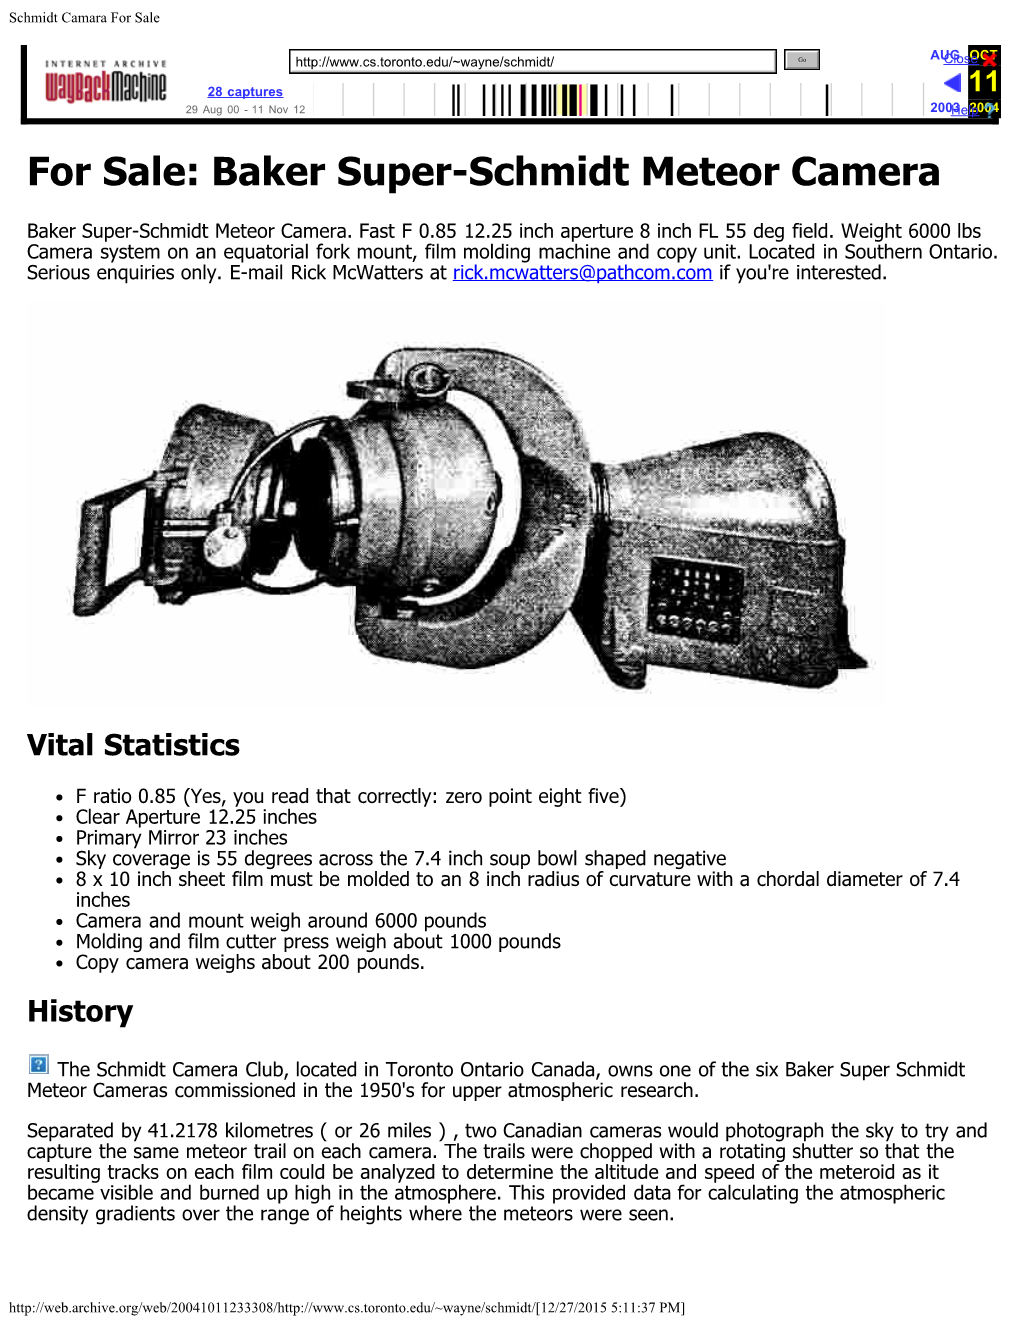 Baker Super Schmidt Meteor Cameras Commissioned in the 1950'S for Upper Atmospheric Research